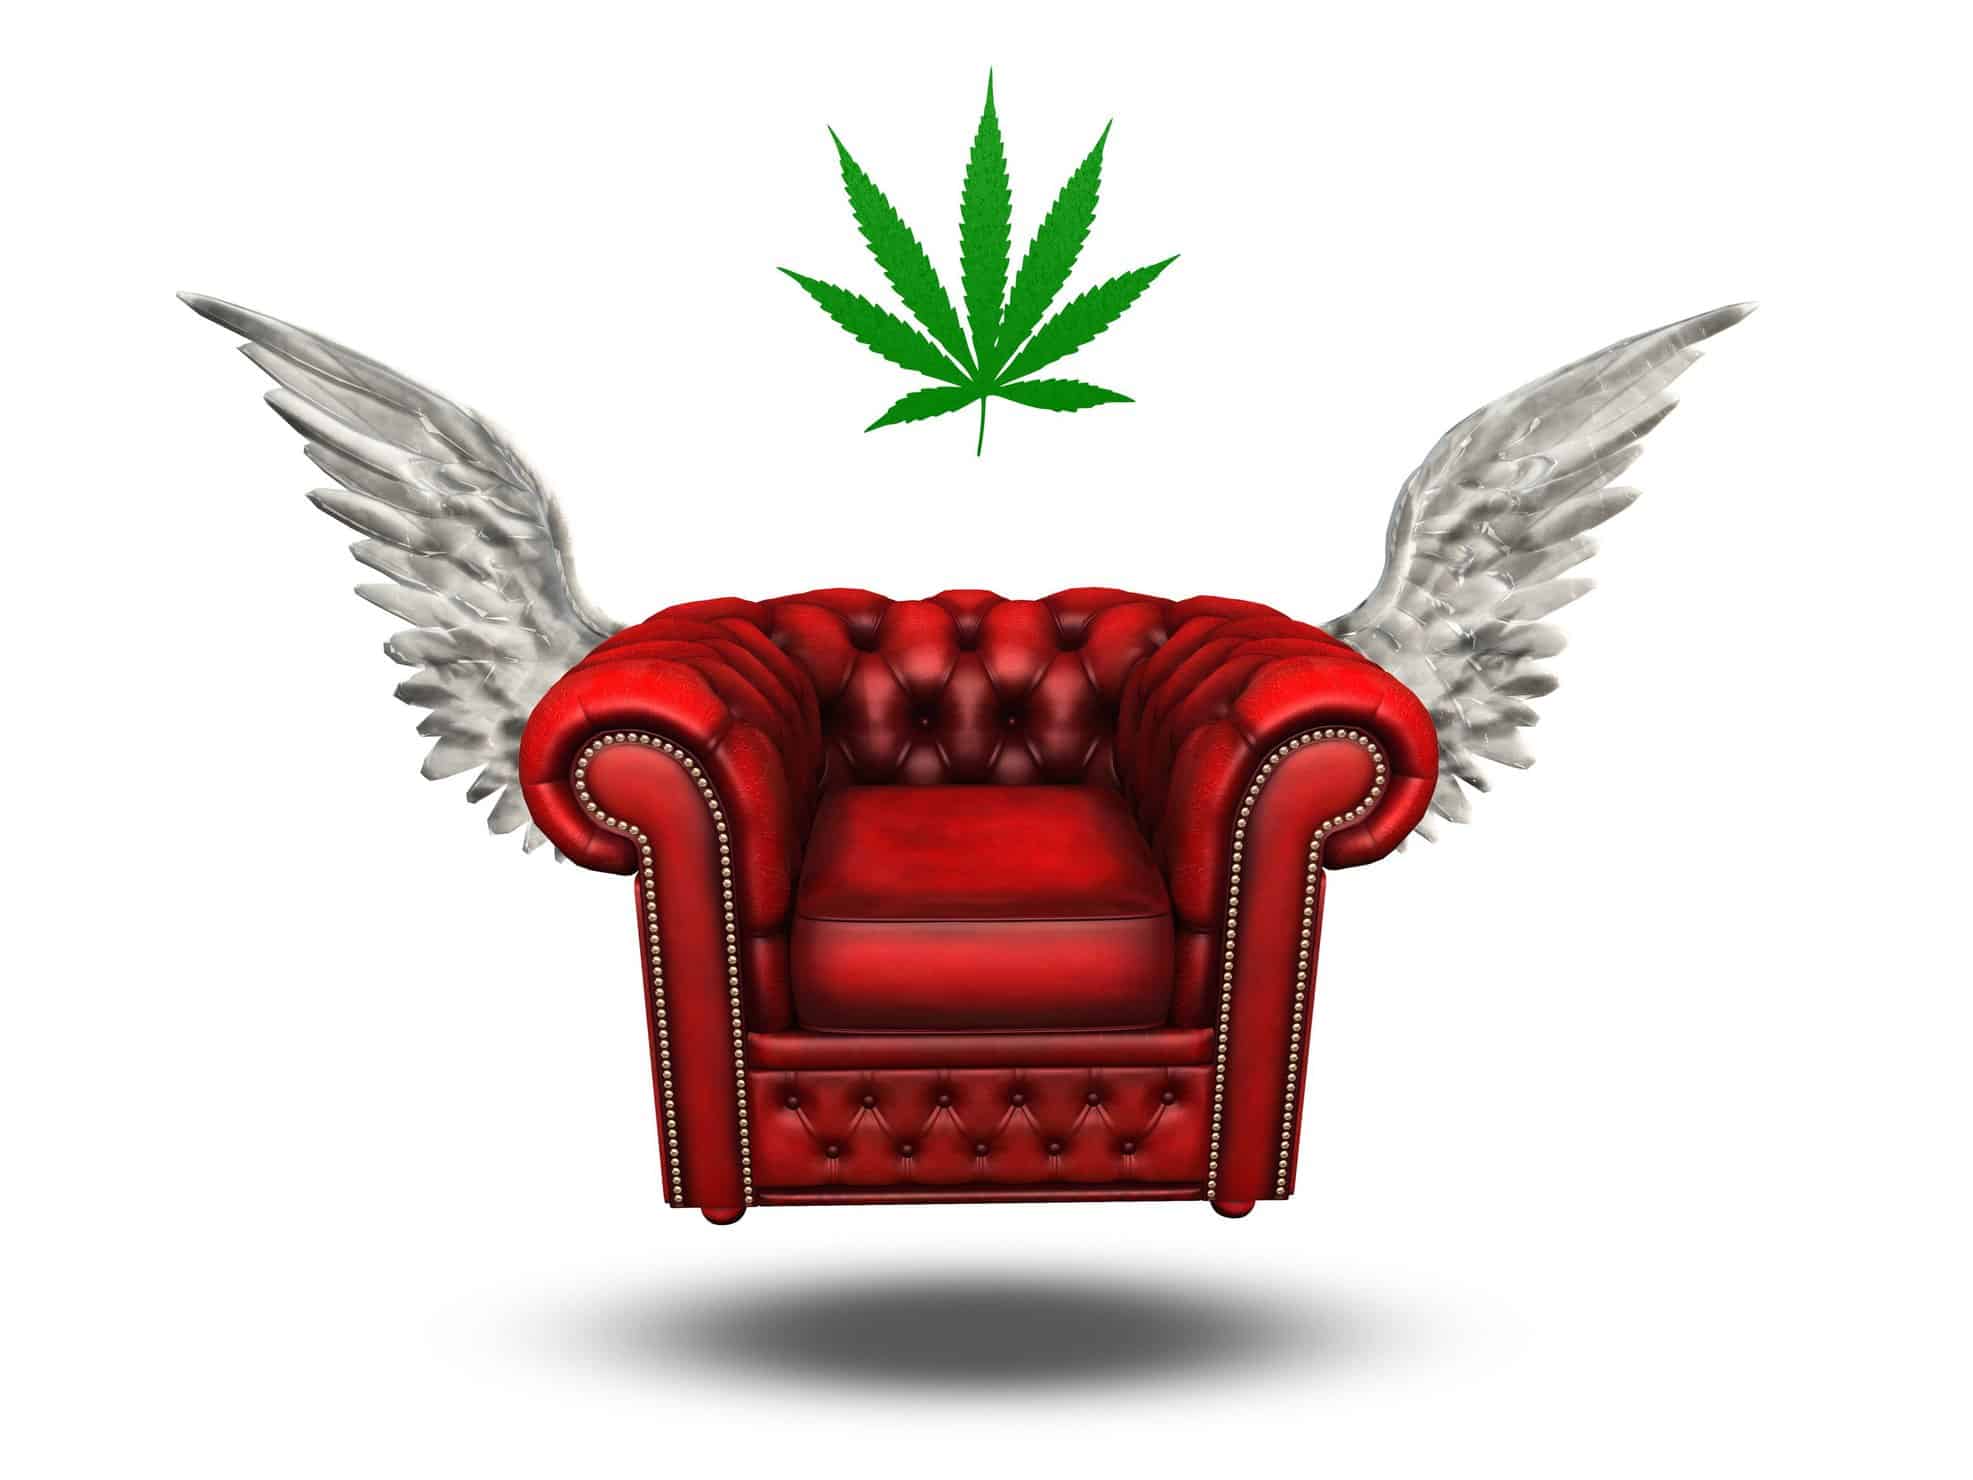 Legal Marijuana Lounges Poised to Open in More Areas. Red chair with wings and a cannabis leaf.